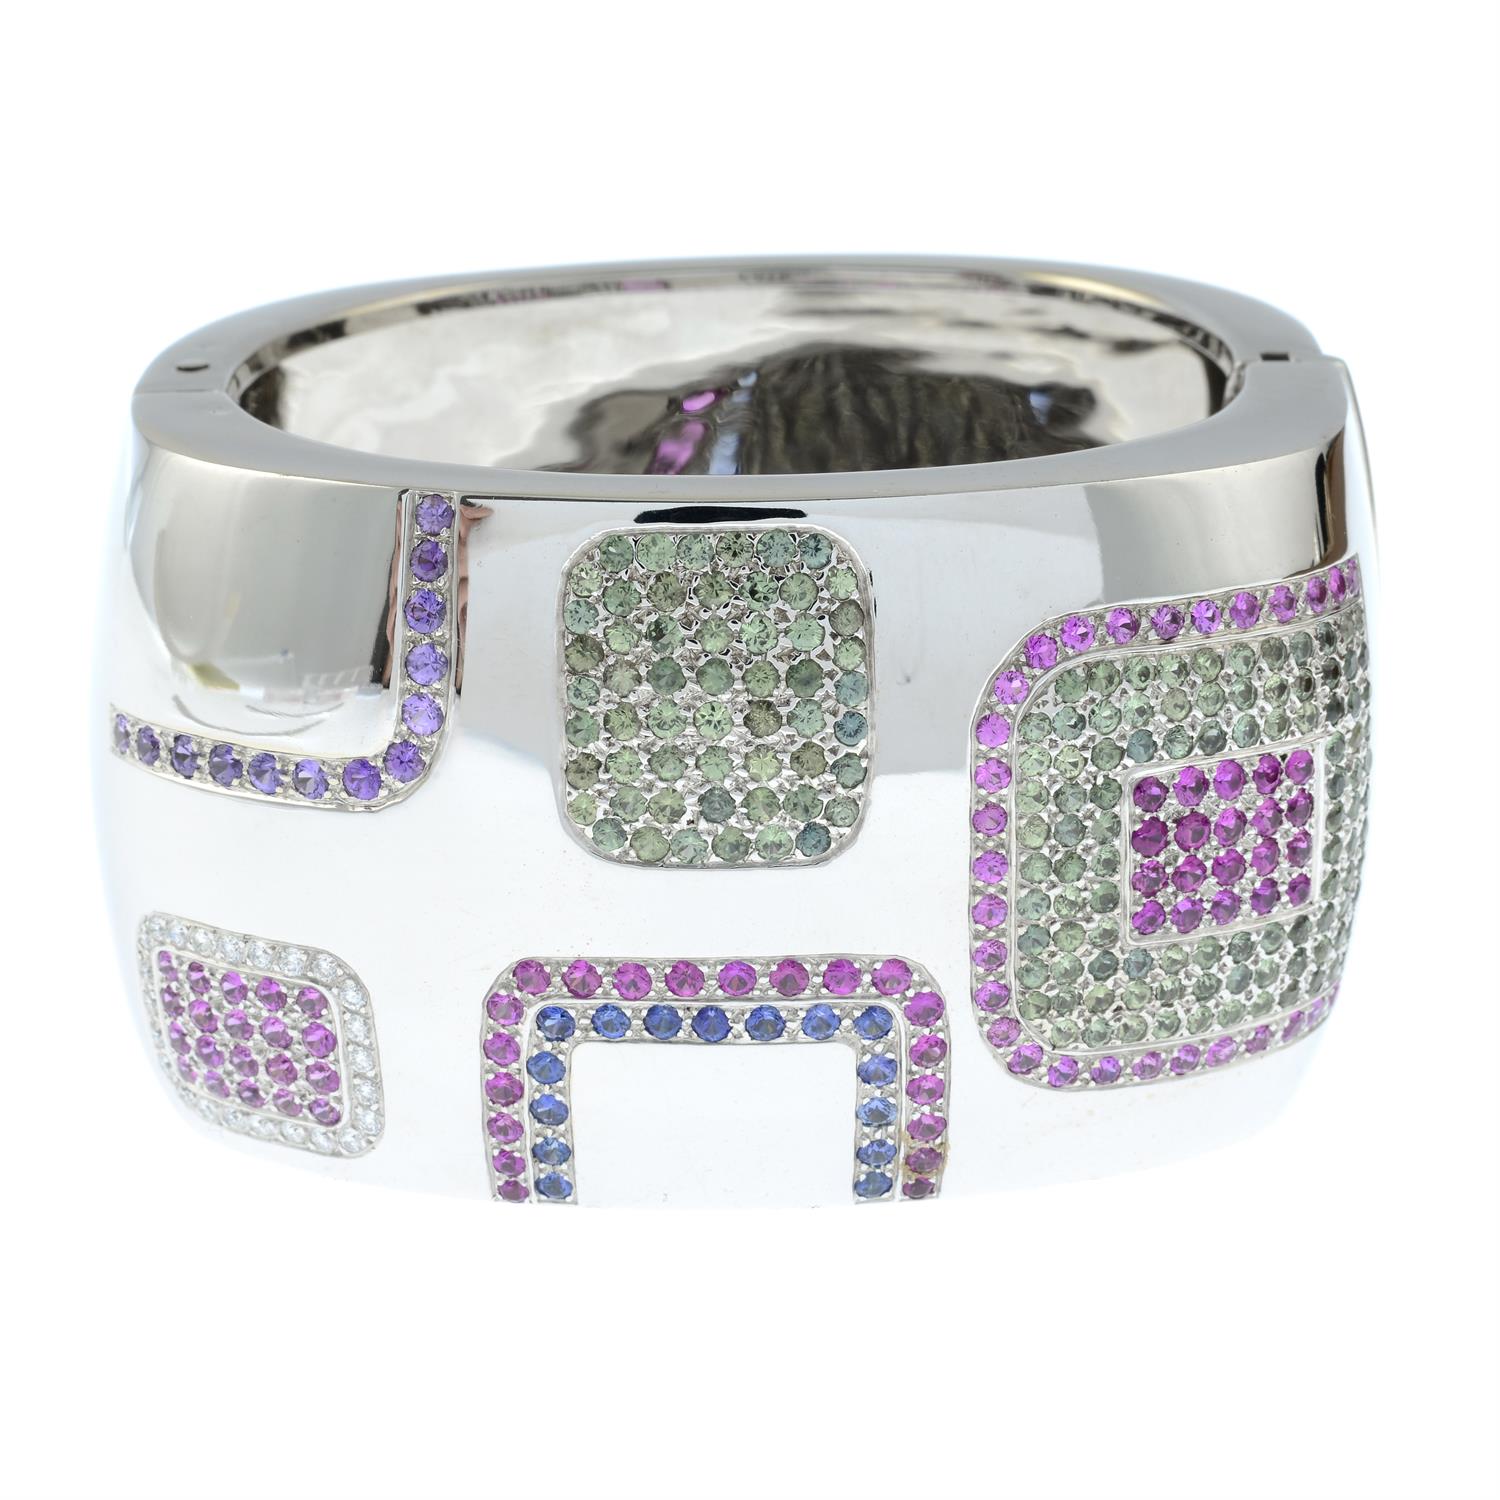 An 18ct gold, vari-hue sapphire and diamond 'Patchwork' hinged bangle, by Ritz Fine Jewellery. - Image 2 of 4